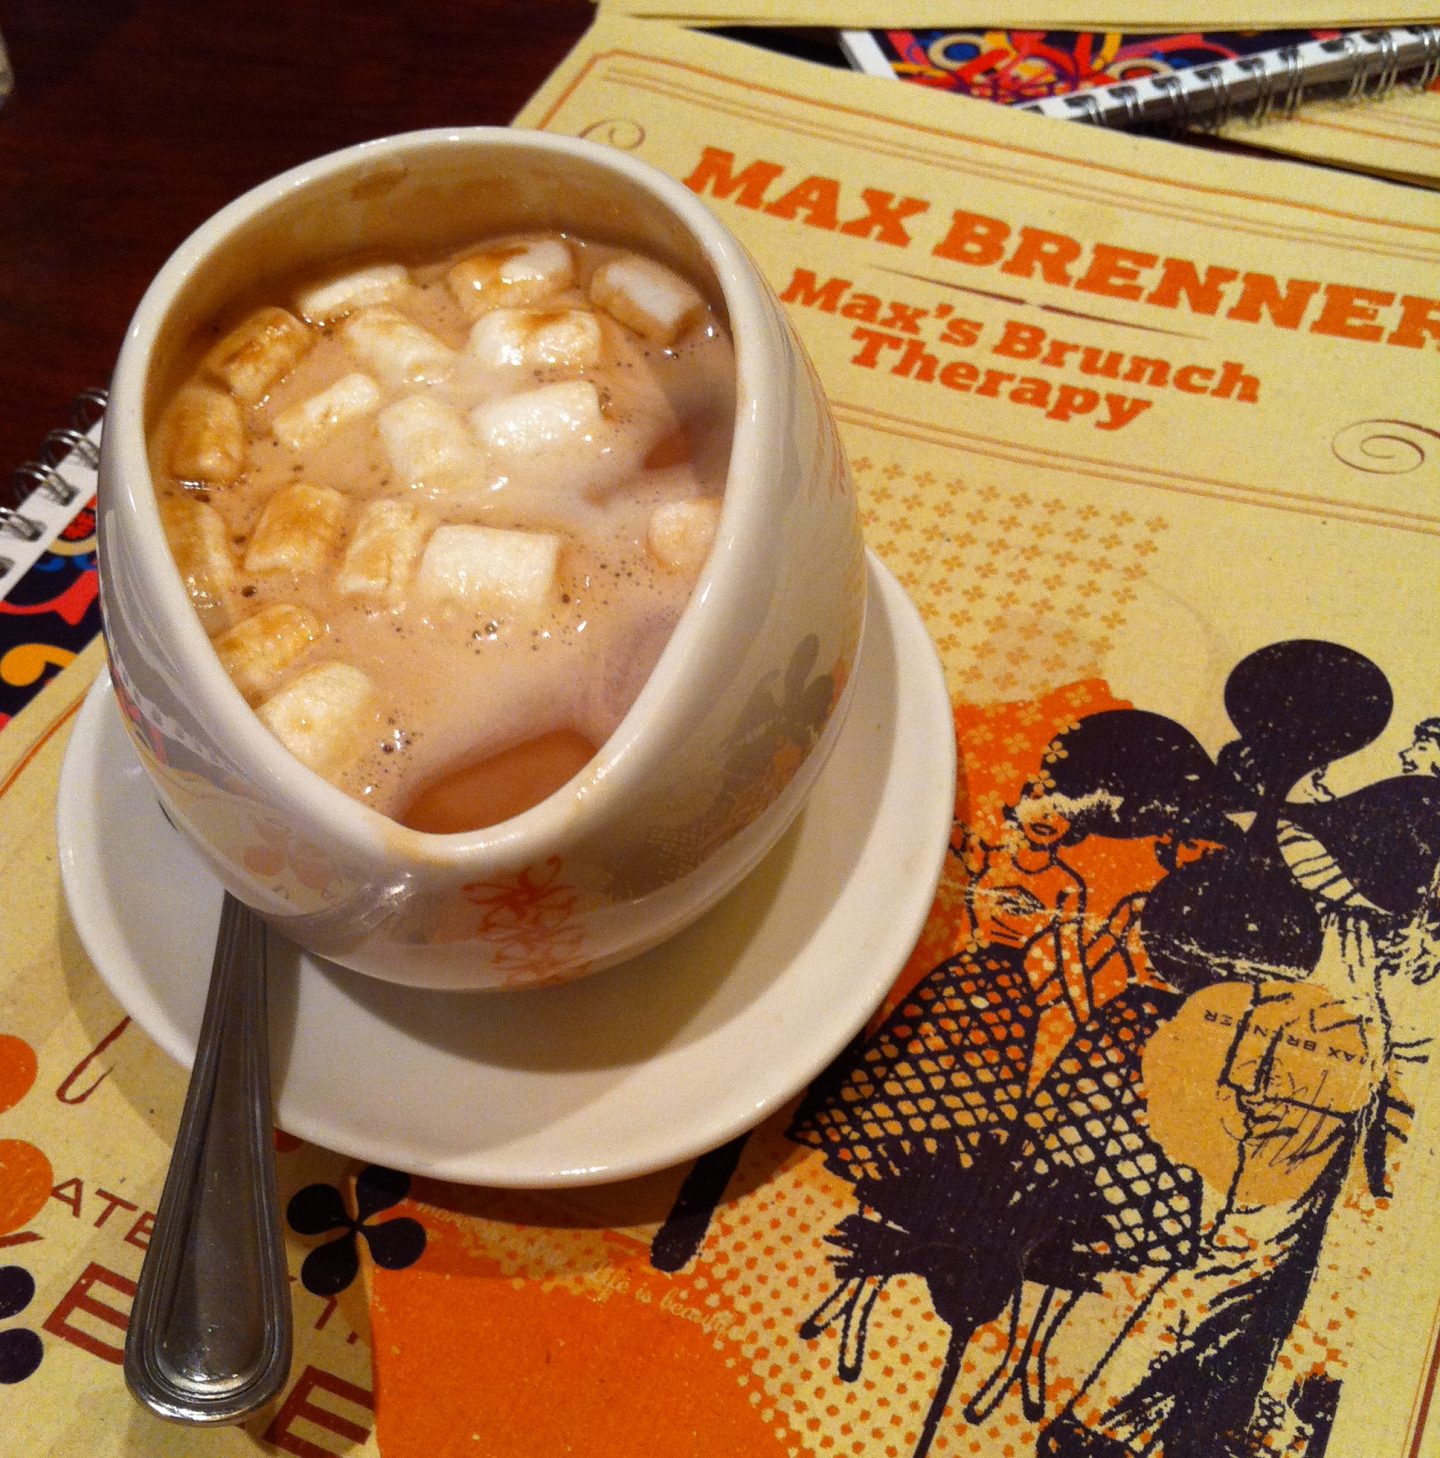 Max Brenner's Hot Chocolate with Marshmallows